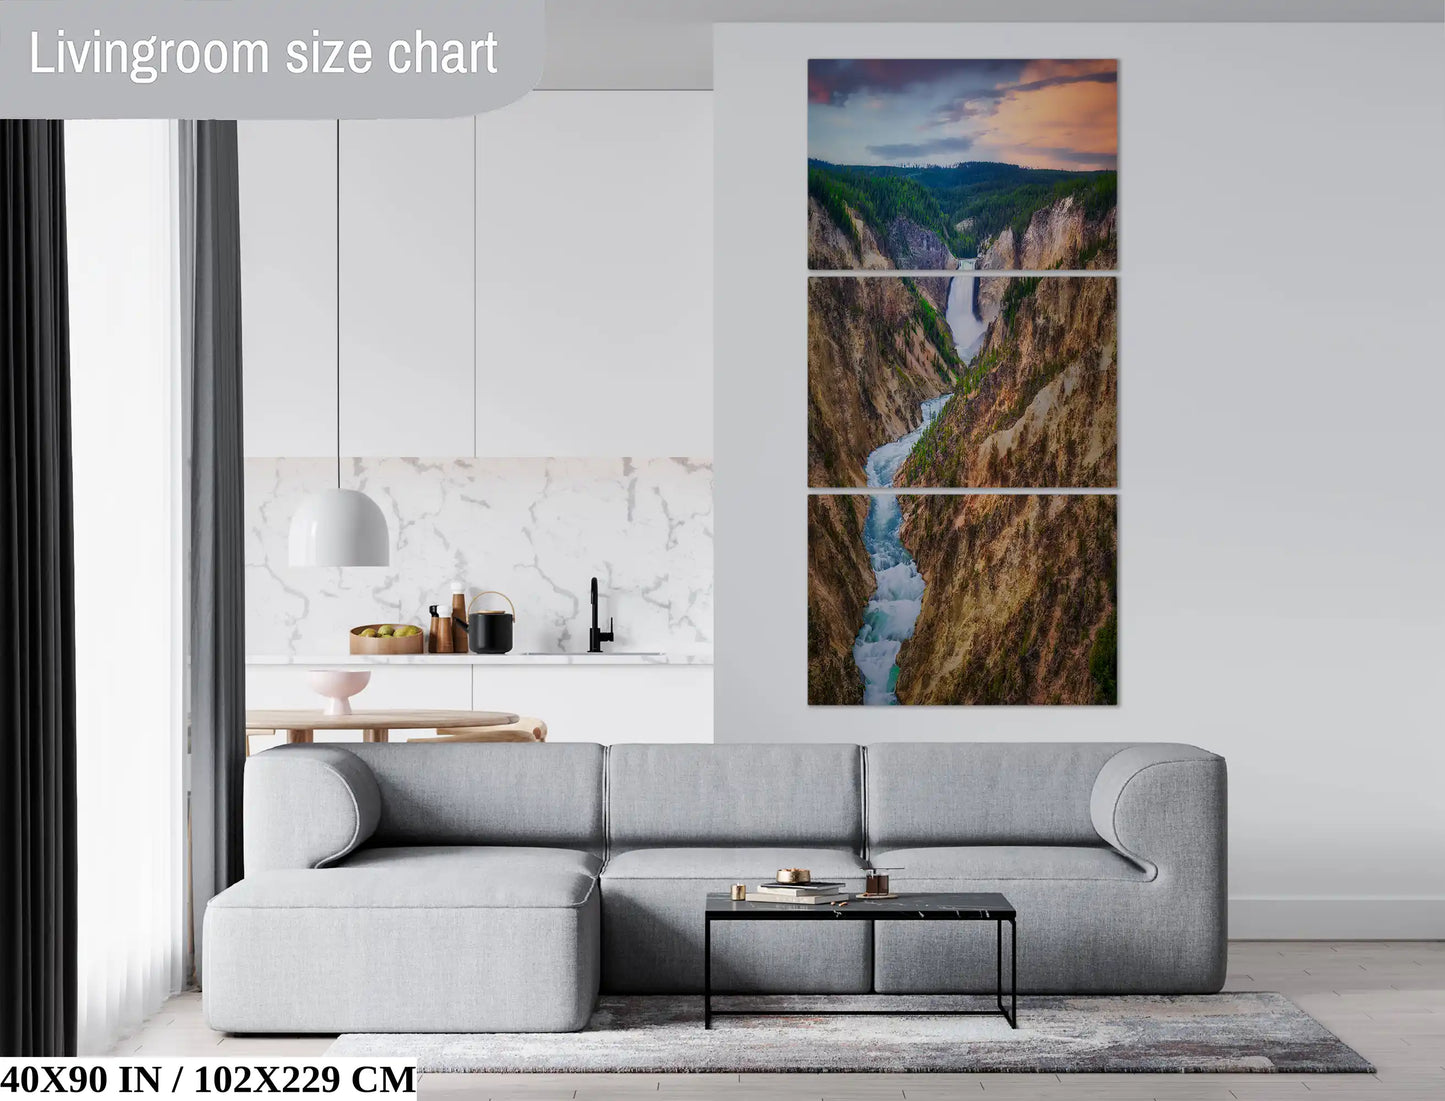 An impressive 40x90 inch wall art of Lower Yellowstone Falls at sunset in a modern living room, serving as a captivating centerpiece.